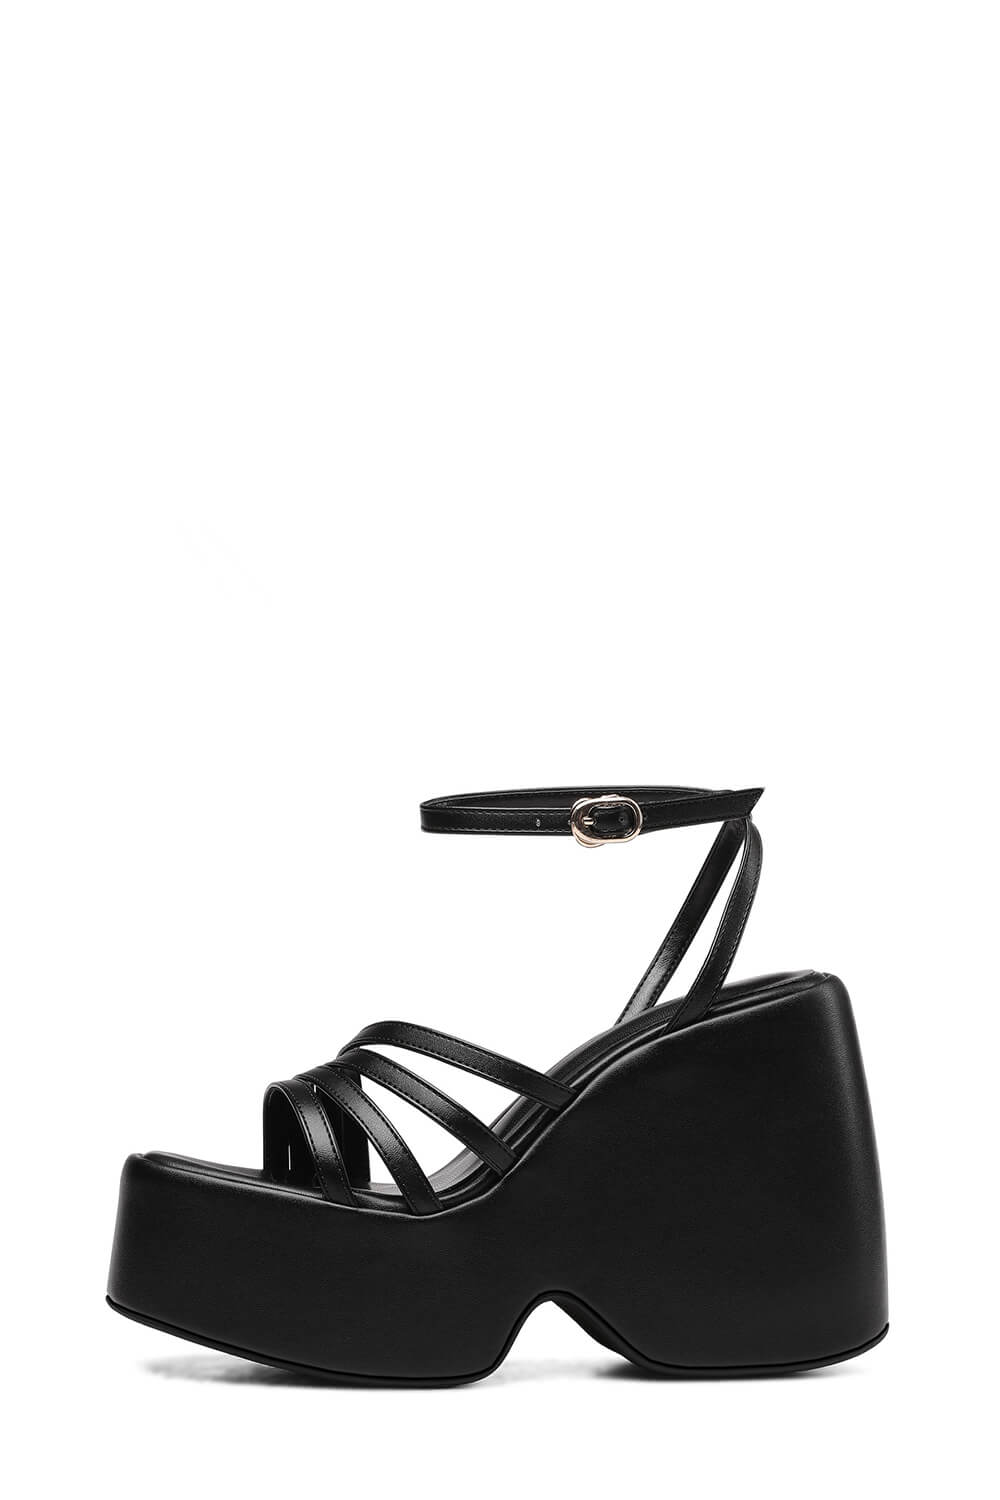 Faux Leather Strappy Peep Toe Wedge Heeled Ankle Sandals - Black ...